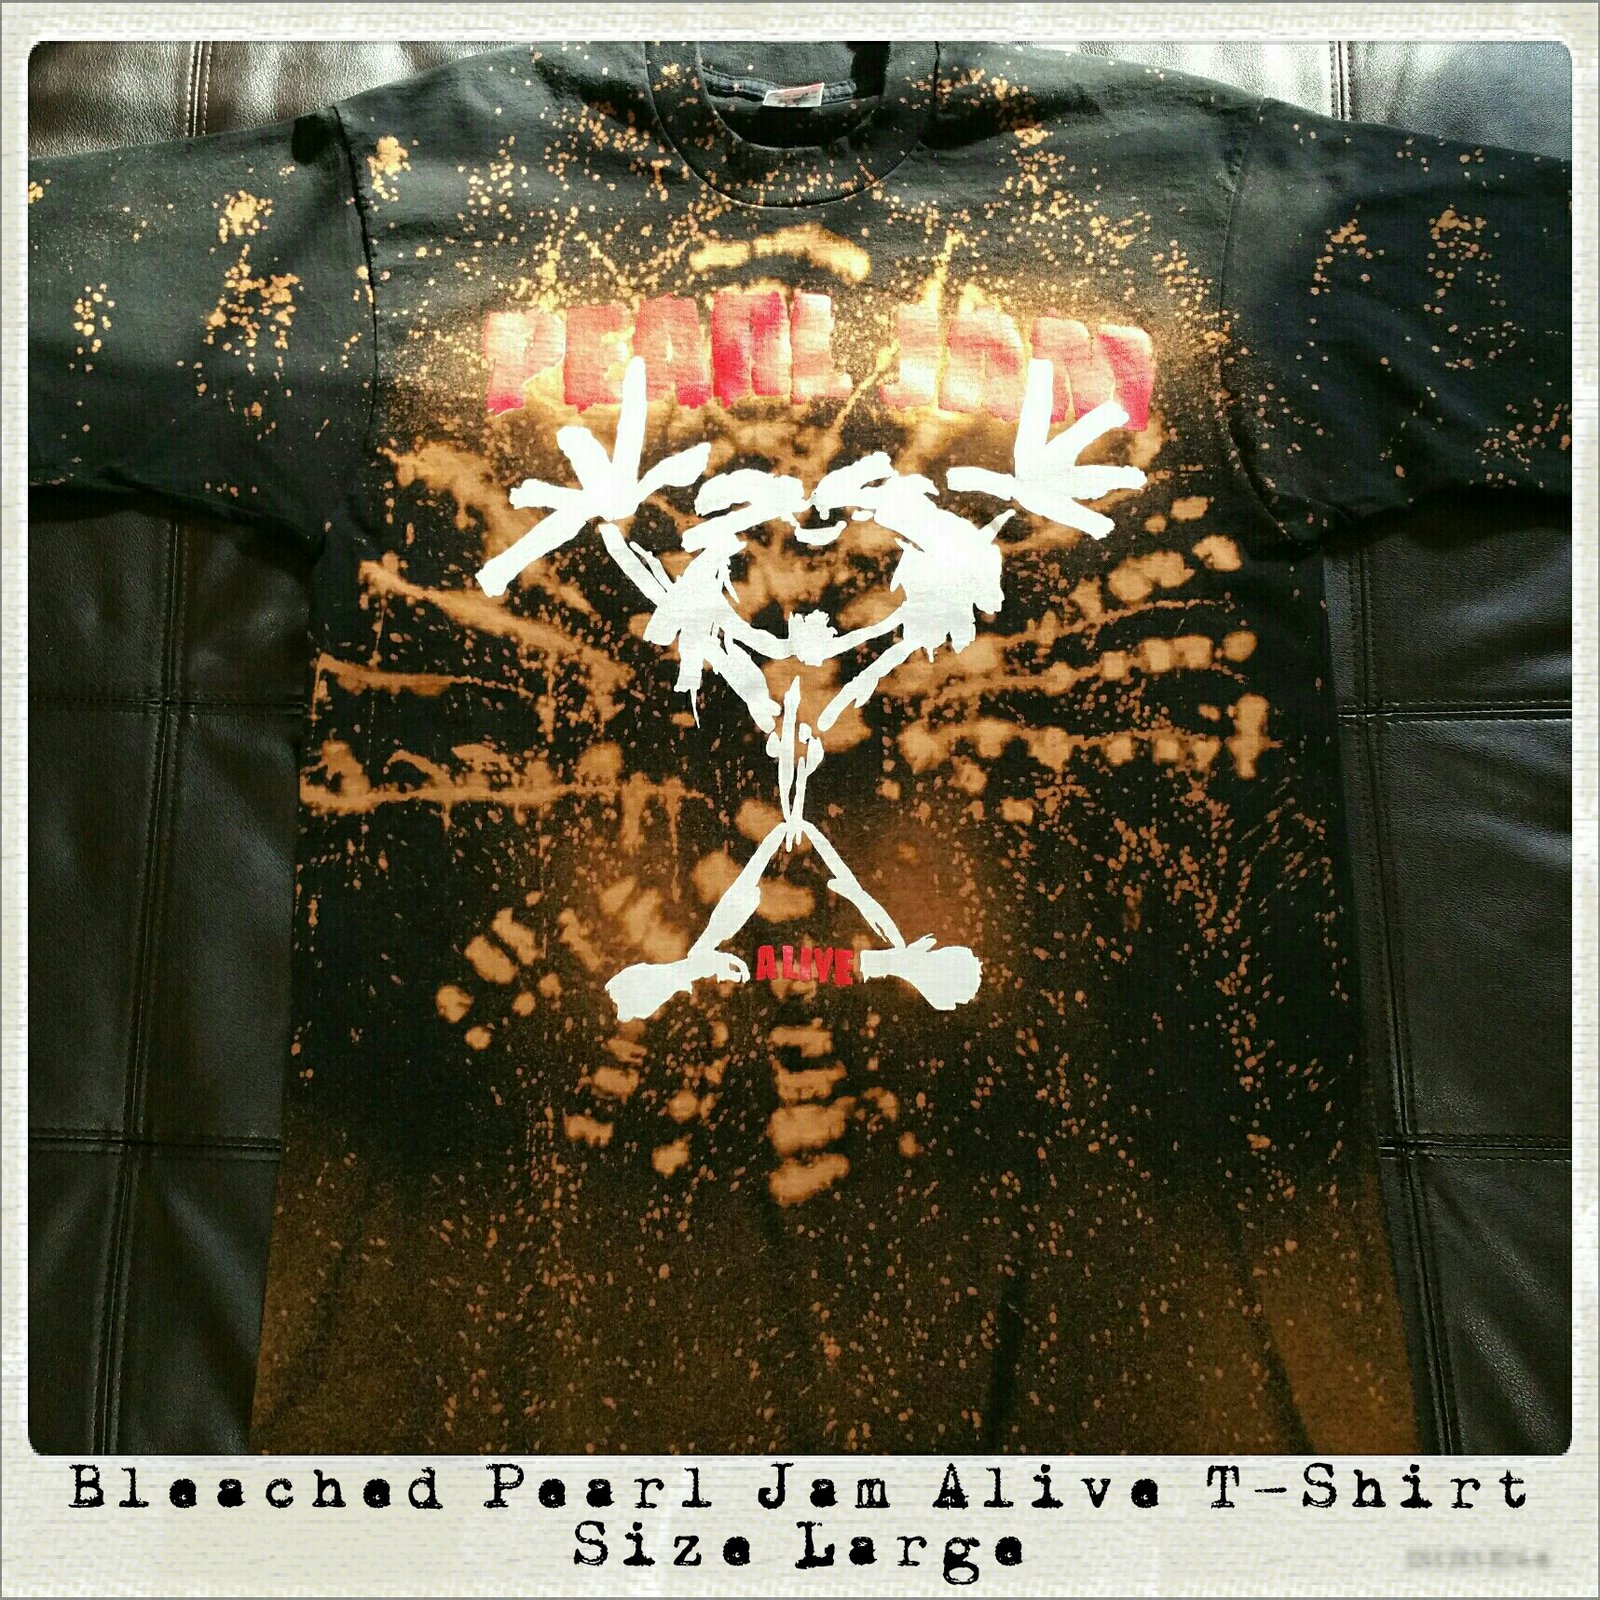 Bleached Pearl Jam Alive T-Shirt Size Large